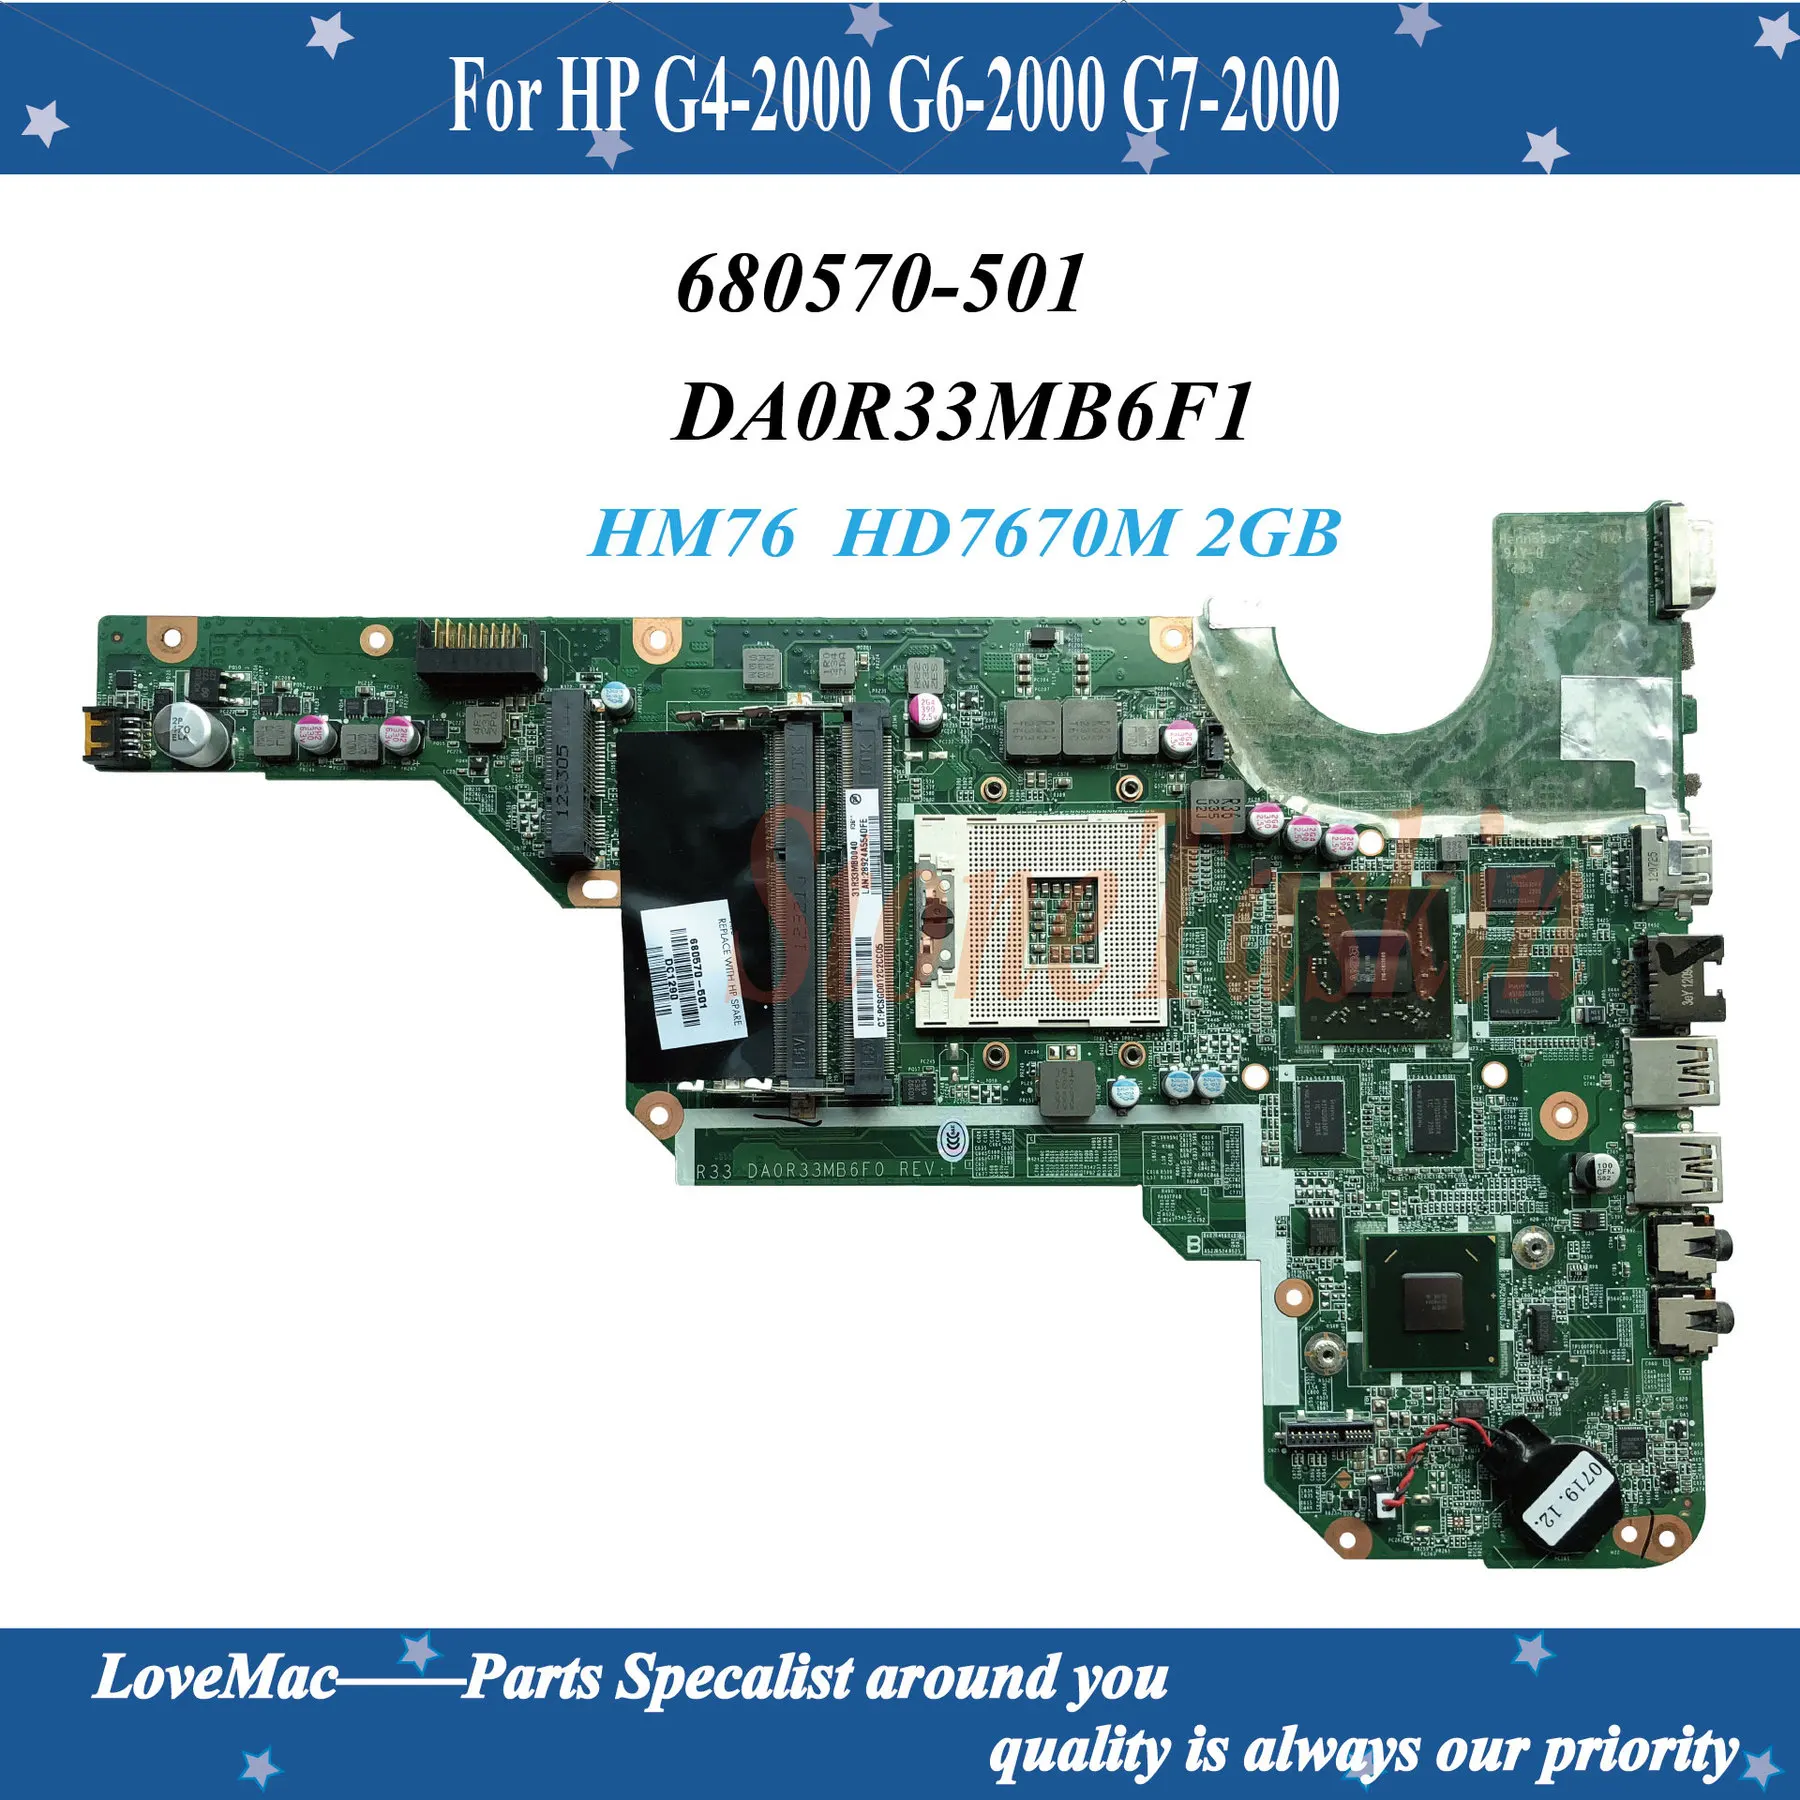 

High quality 680570-001 For HP G4-2000 G6-2000 G7-2000 Laptop Motherboard 680570-501 DA0R33MB6F0 HM76 HD 7670M 2GB 100% tested